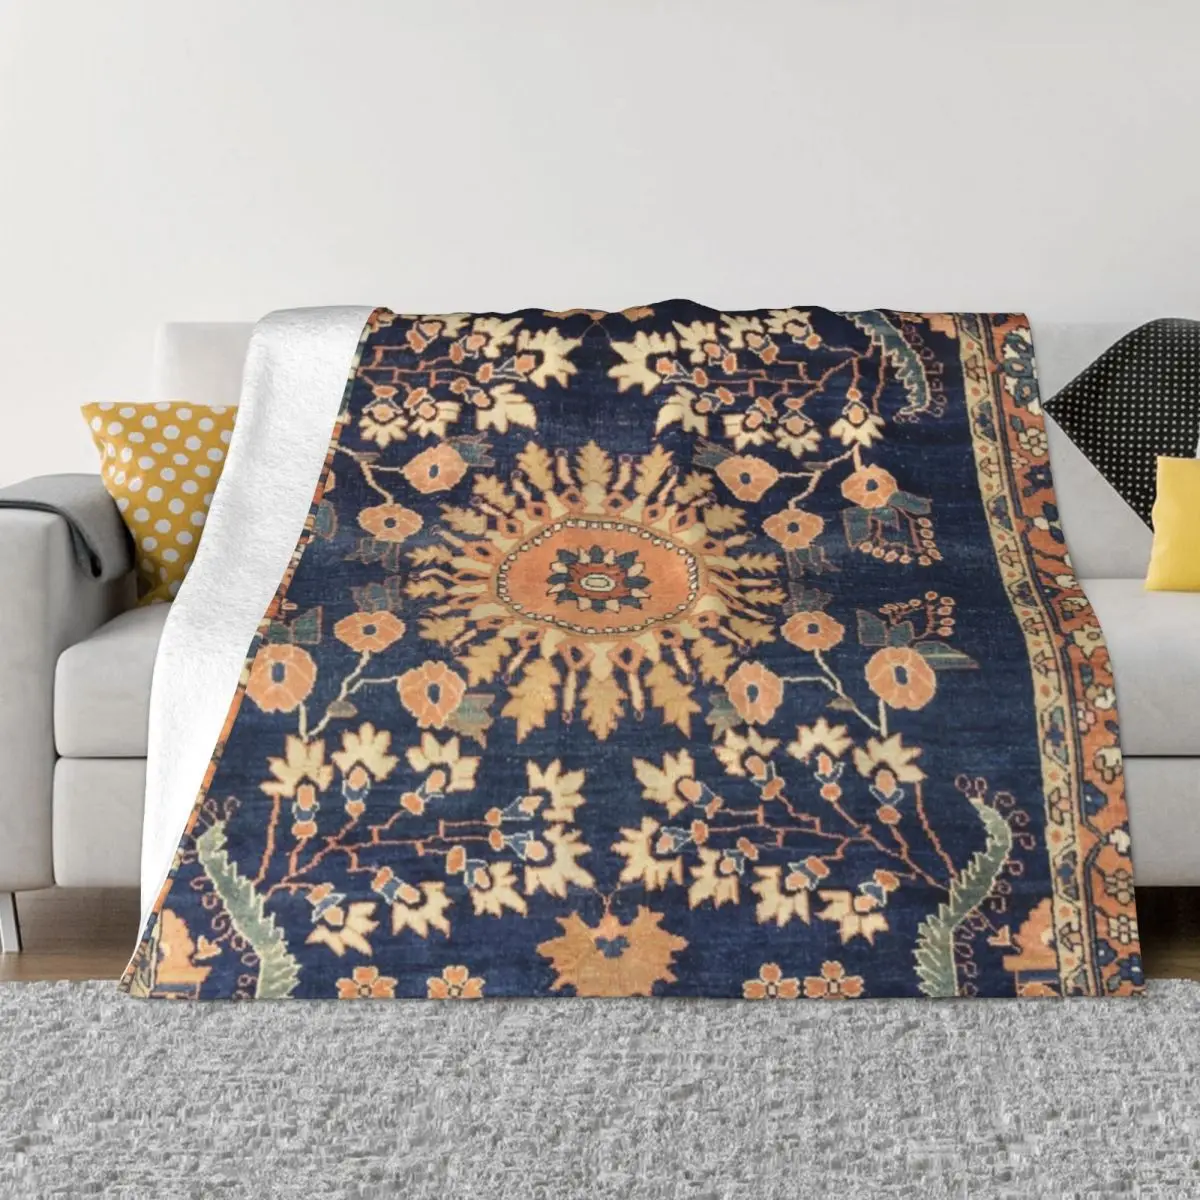 

Sarouk Persian Floral Coral Fleece Blanket Velvet Shaggy Fuzzy Quilt Air Conditioner Home Sofa Bedroom Bedding Throws Adult